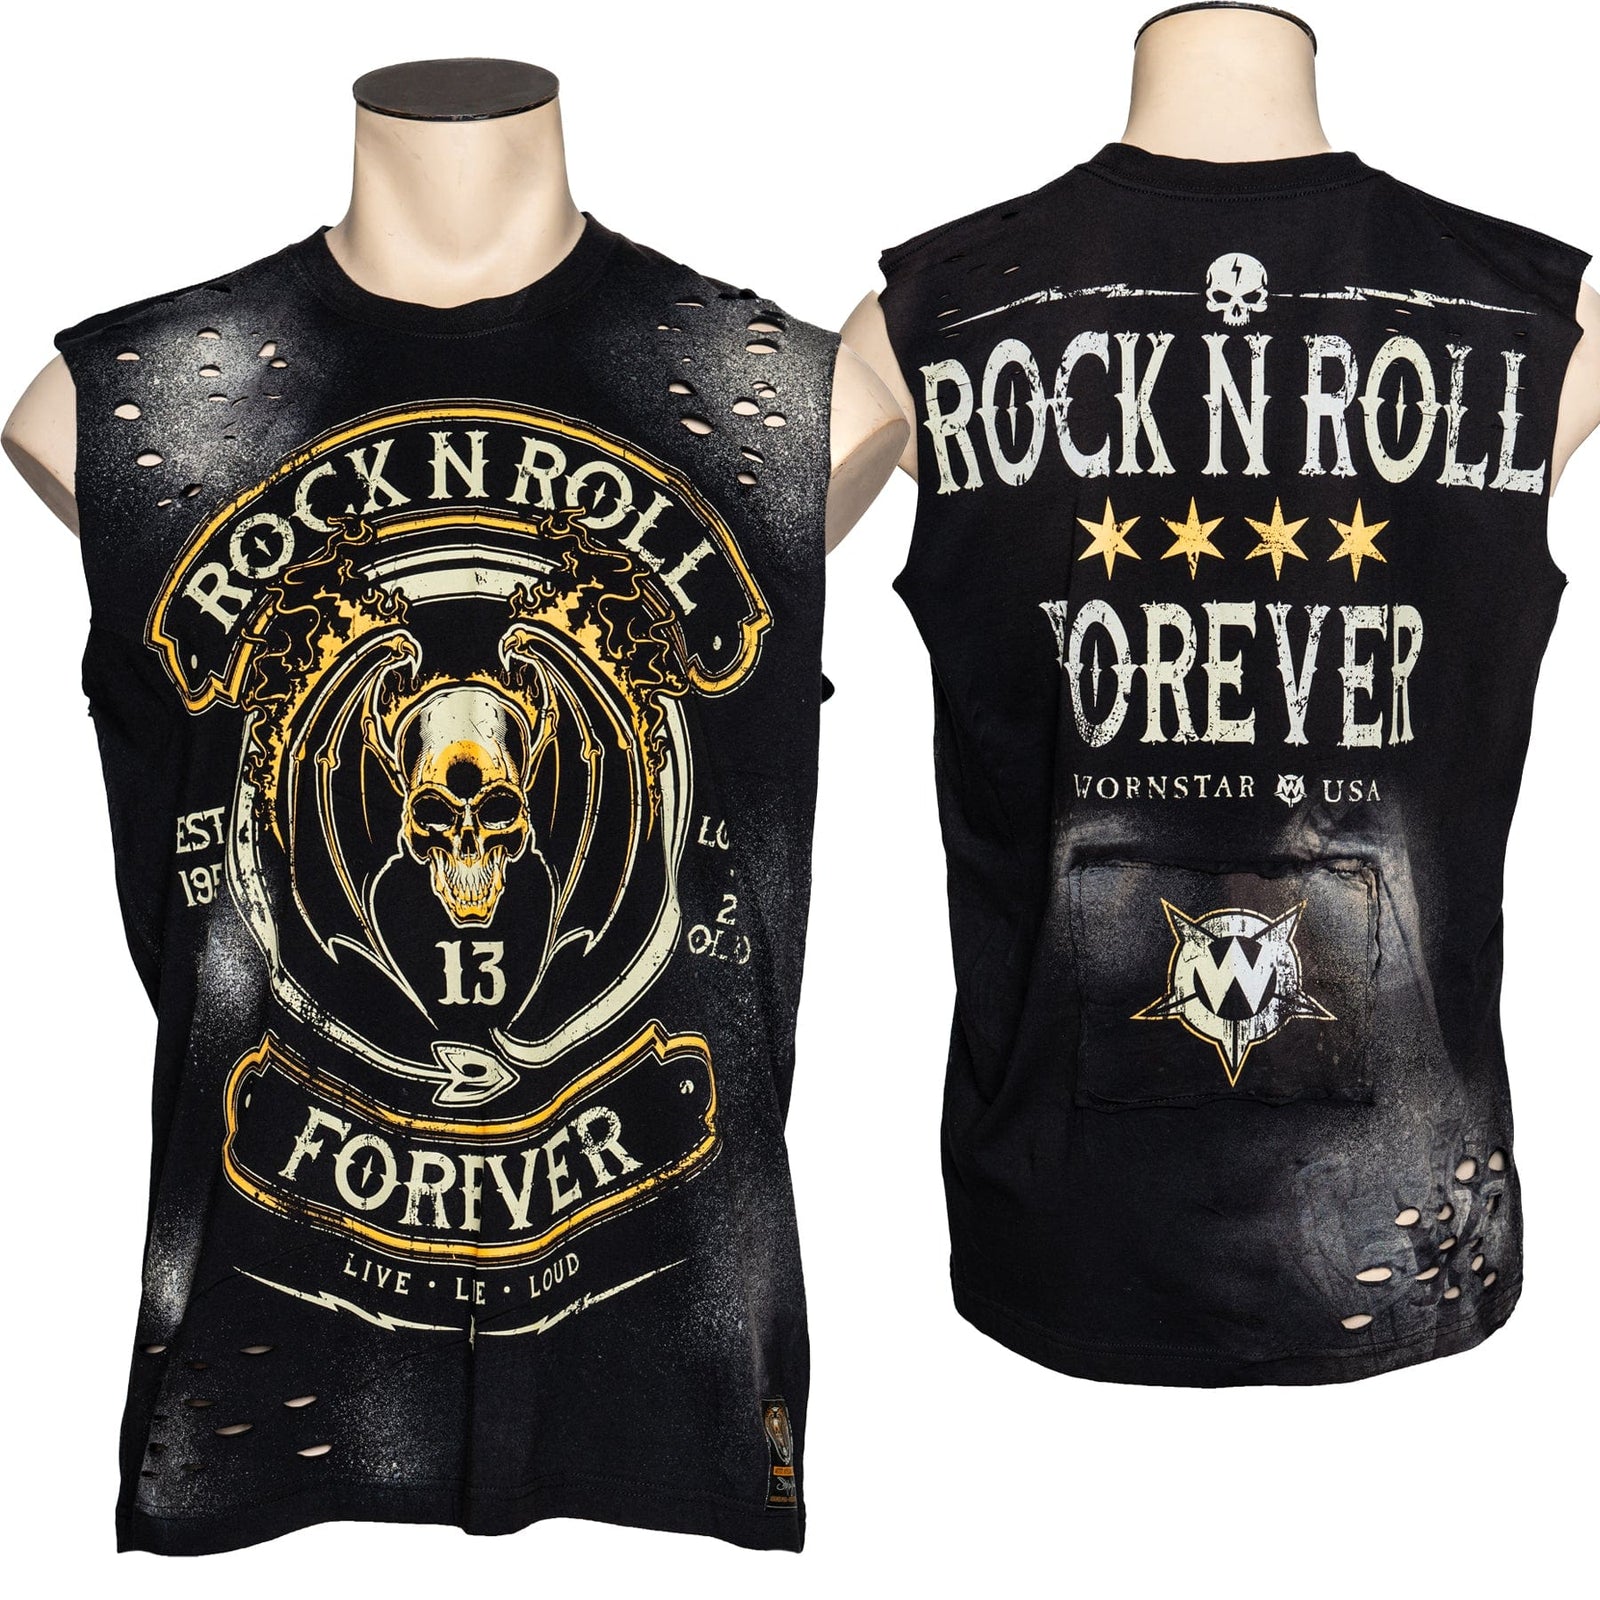 Sirens Collection T-Shirt Large Wornstar Custom - Sleeveless Cut Tee - Rock n Roll Forever -  Ready to Ship